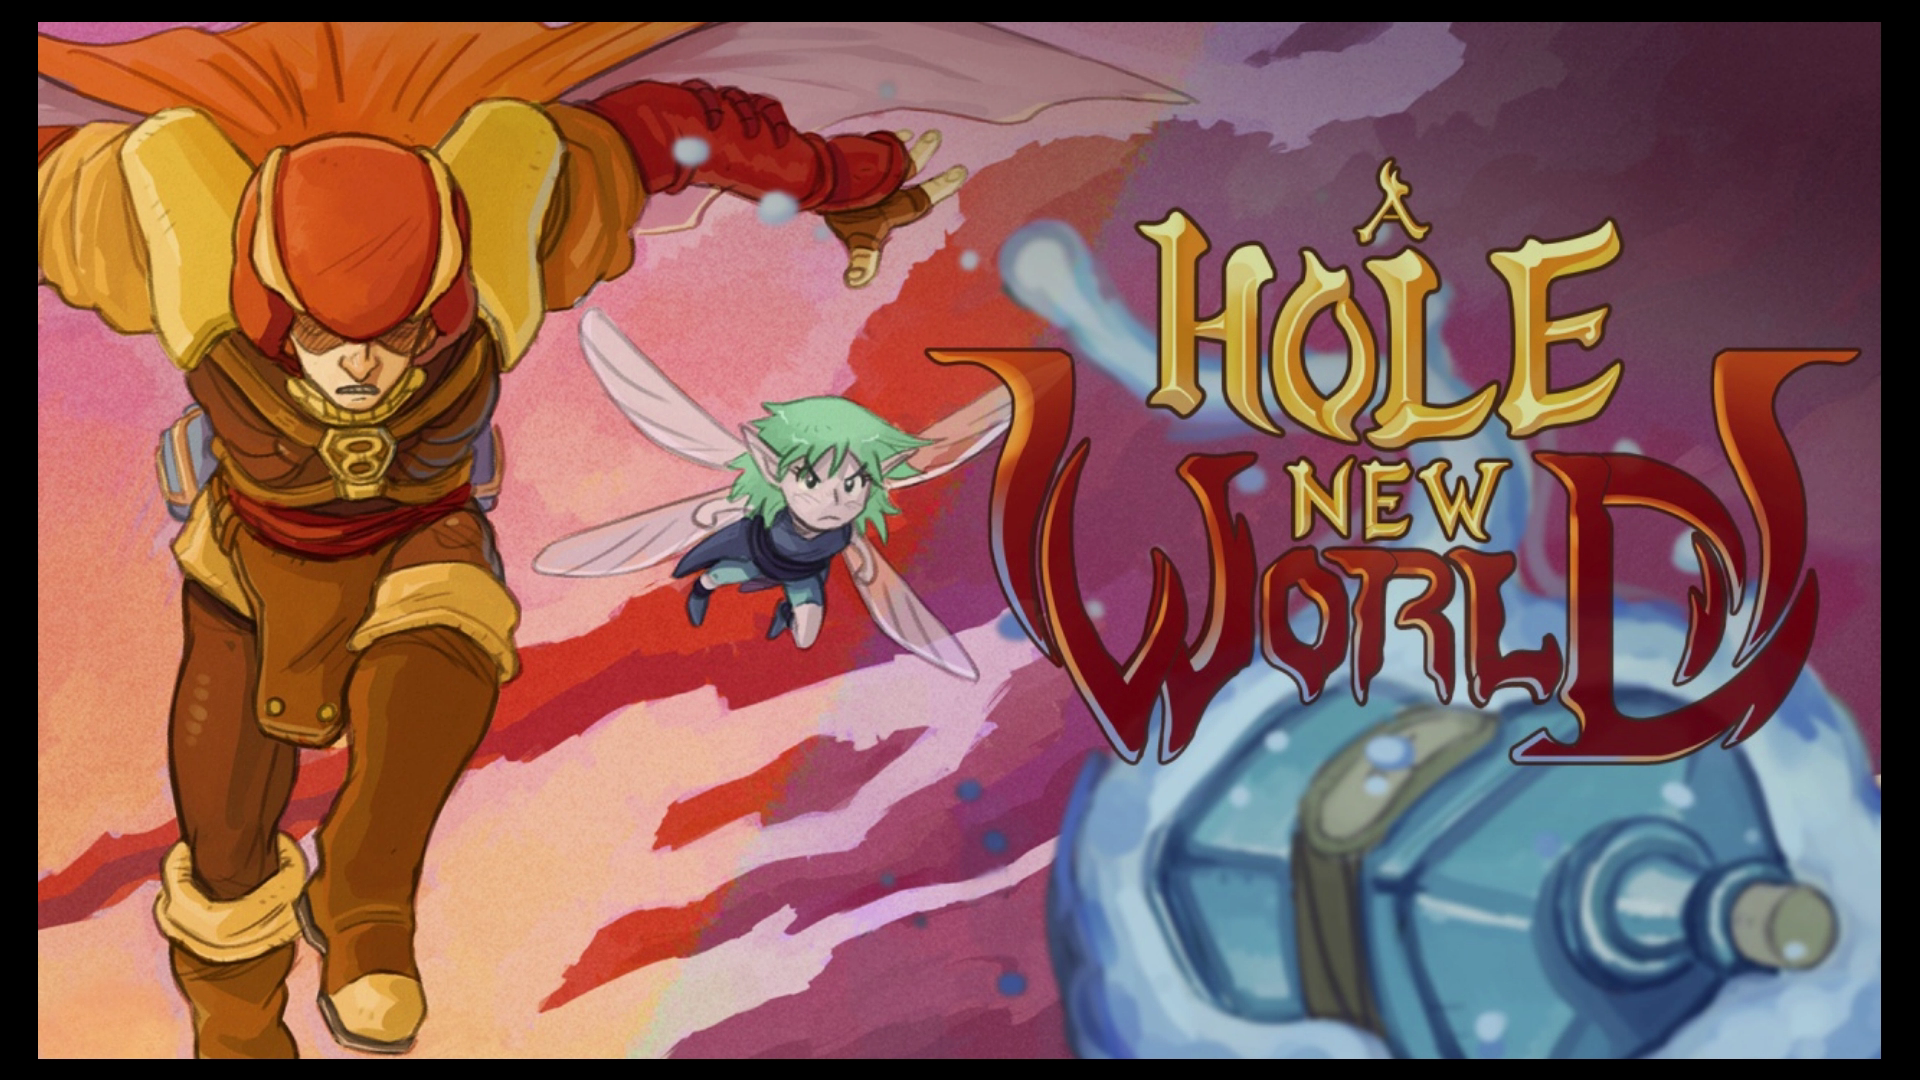 A Hole New World Switch Banner